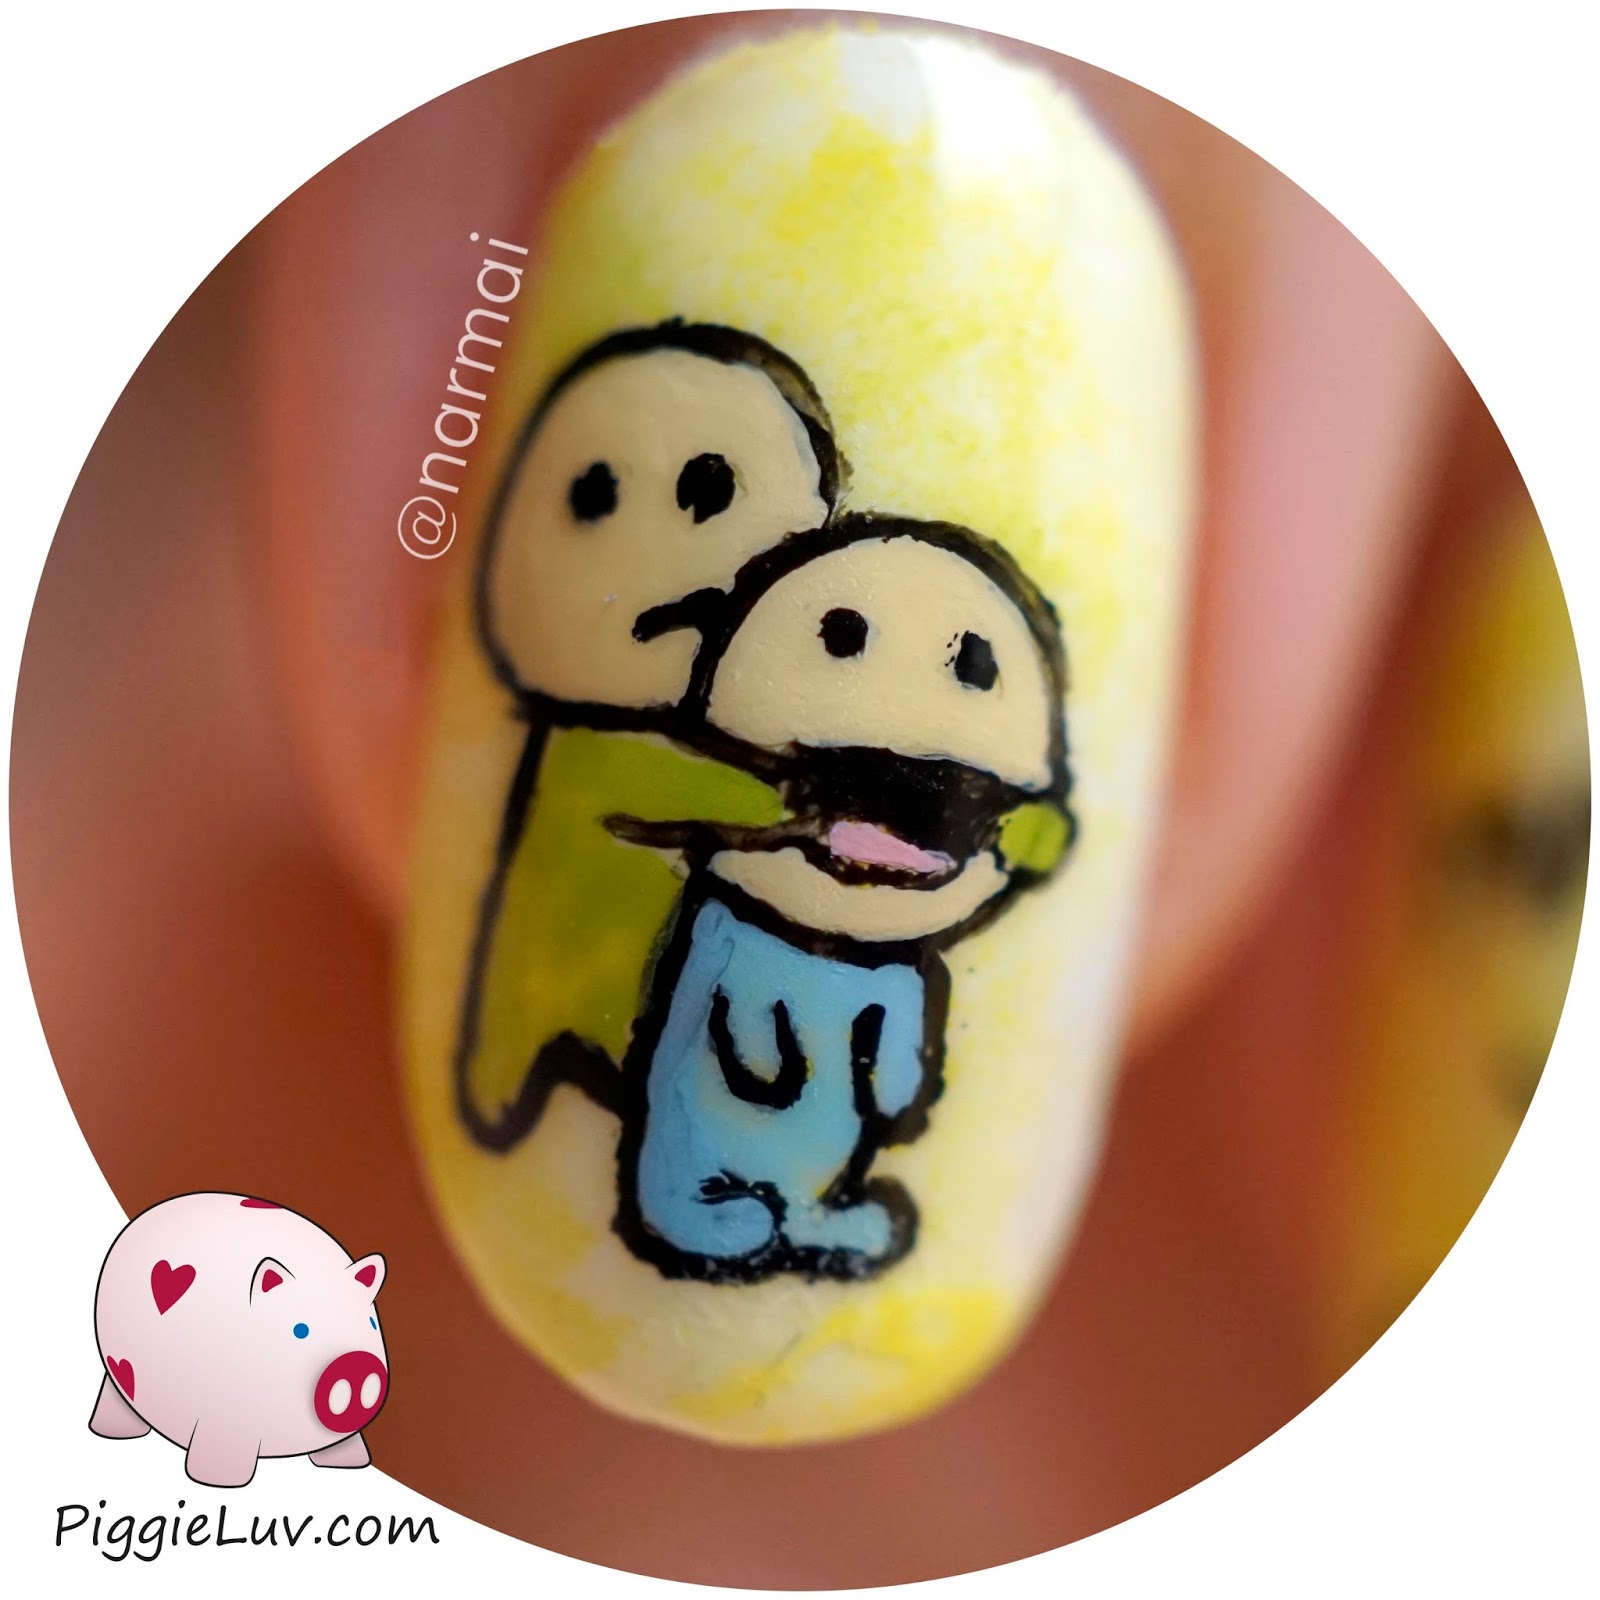 Piggieluv I Can Always Make You Smile Happy Nail Art